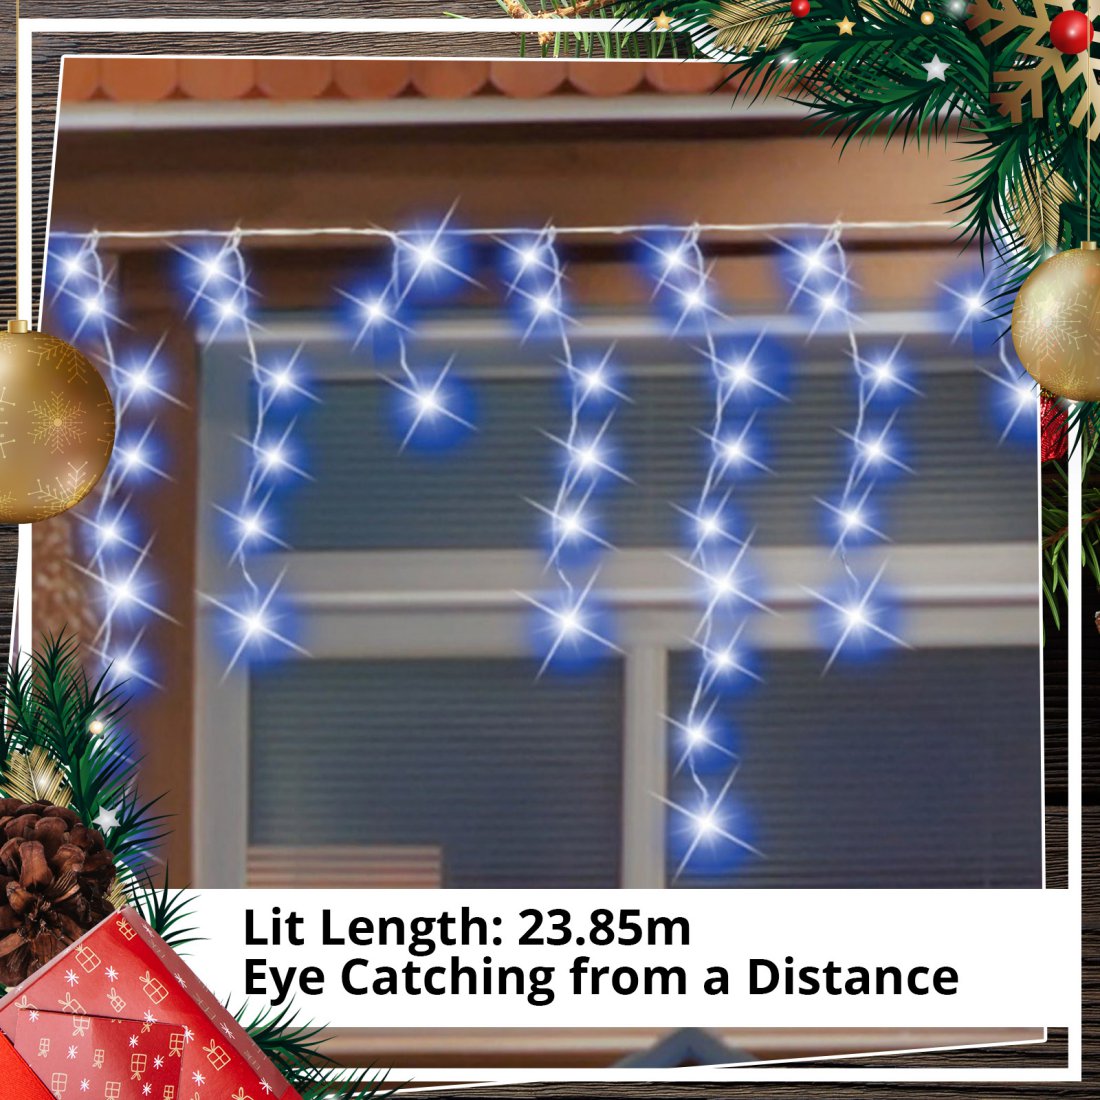 Outdoor 960 LED Snowing Icicle Blue Christmas Light Display with Timer